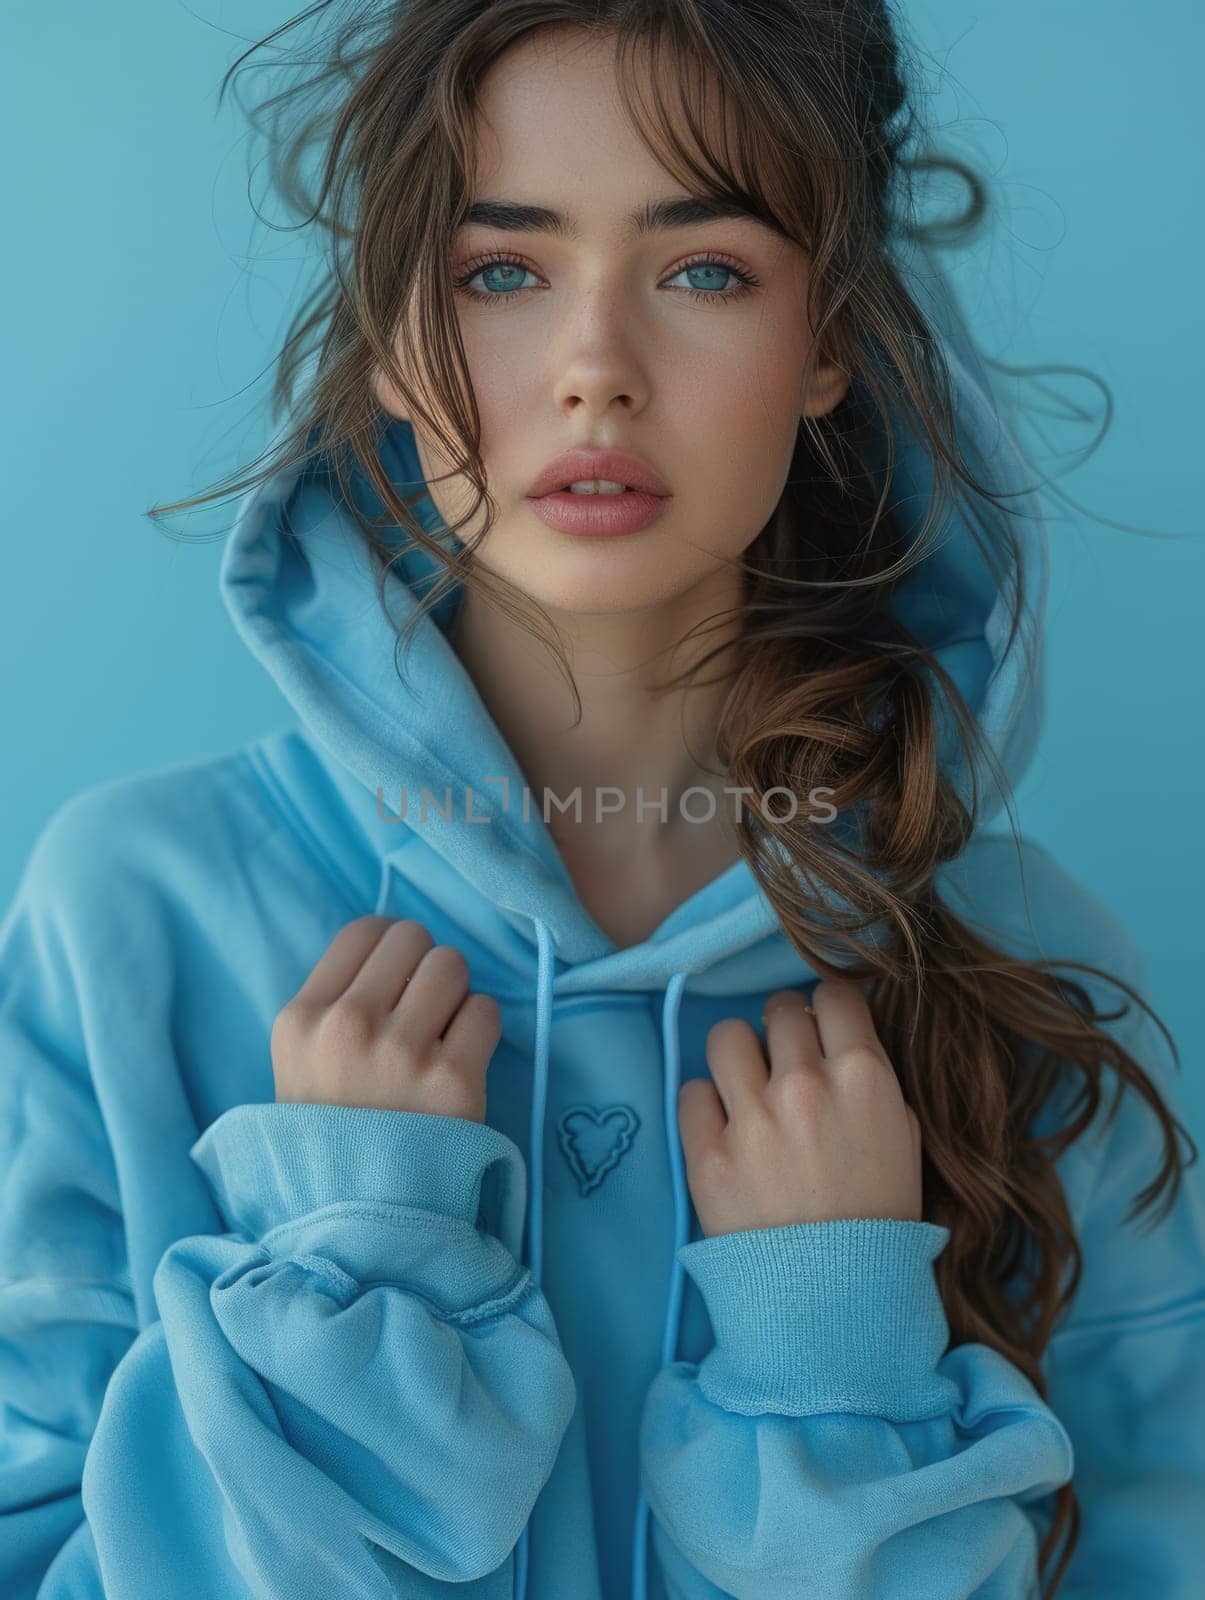 A woman with long hair is captured wearing a blue hoodie.